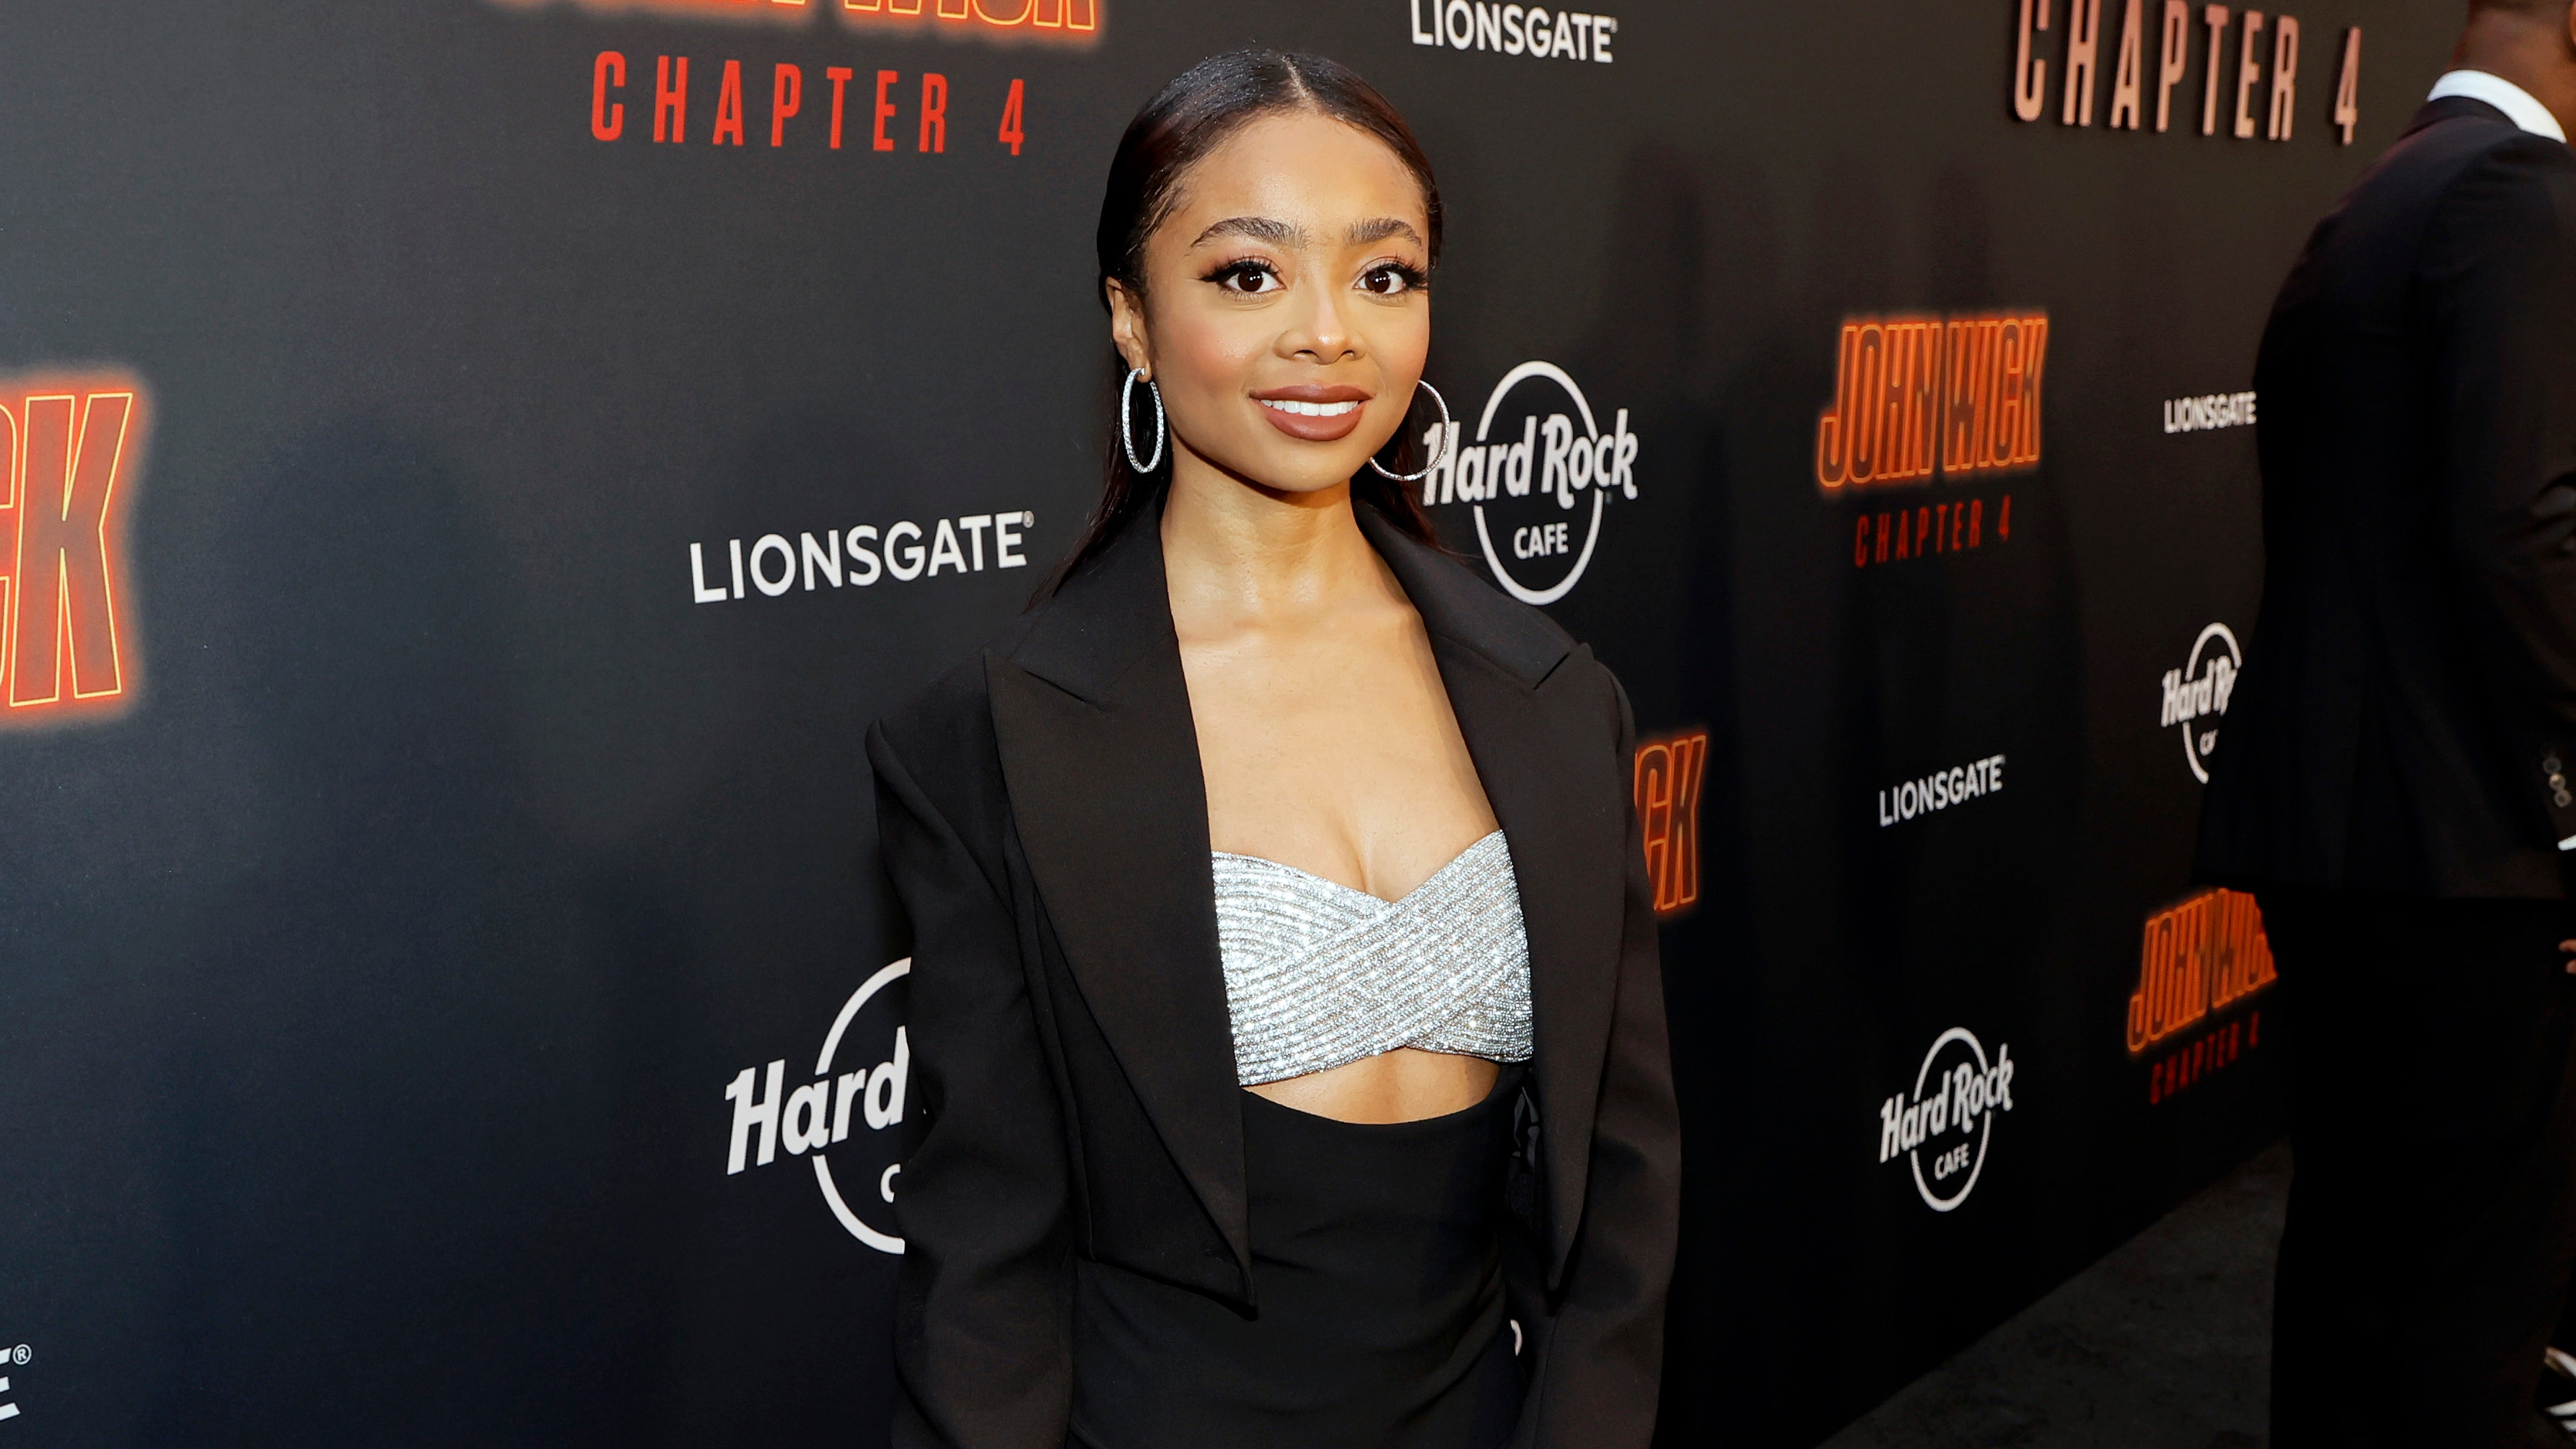 Skai Jackson at the premiere of "John Wick: Chapter 4" in Los Angeles